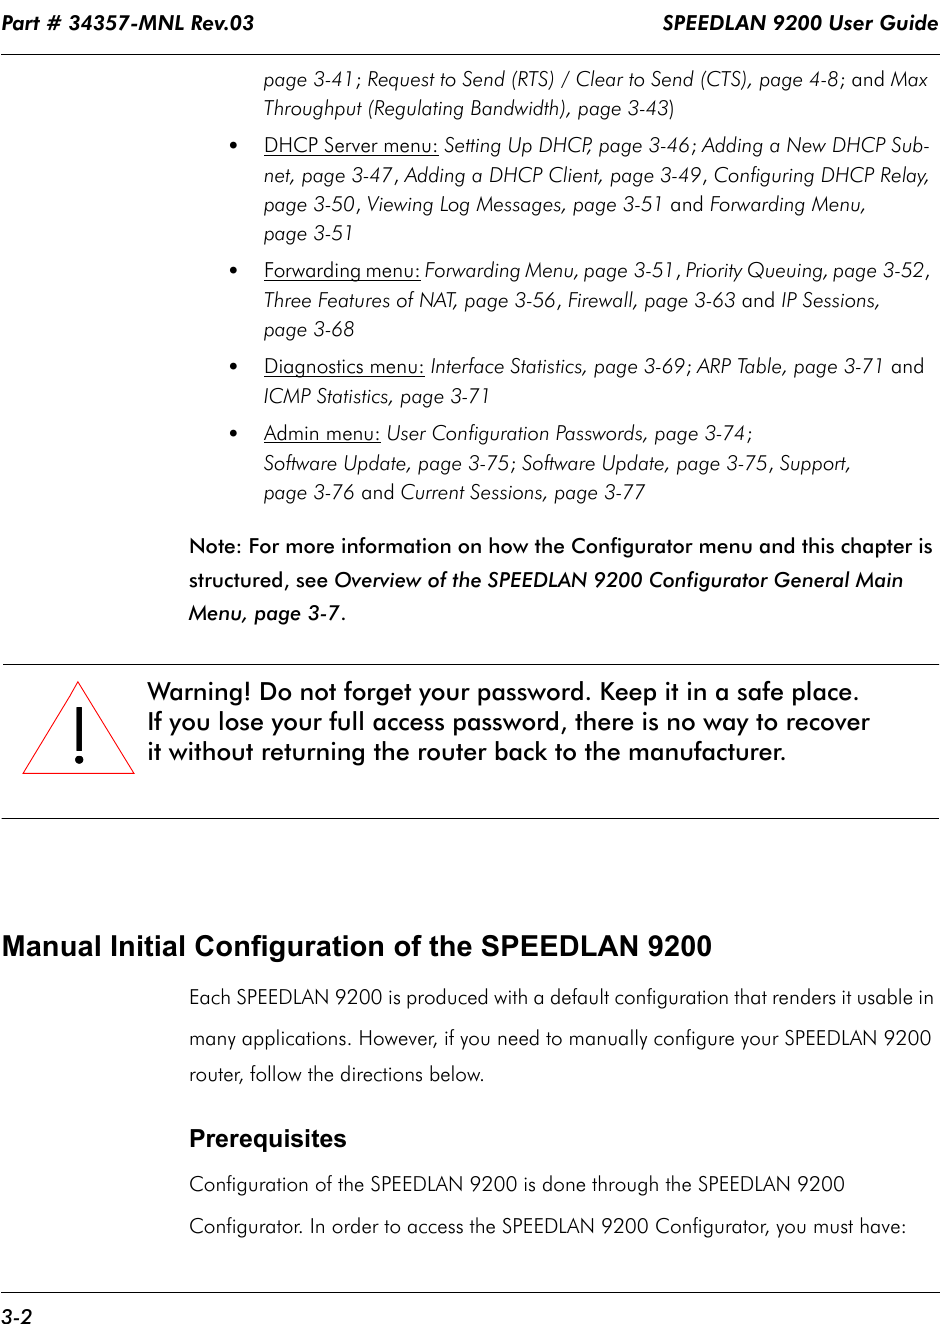 Part # 34357-MNL Rev.03                                                                   SPEEDLAN 9200 User Guide 3-2page 3-41; Request to Send (RTS) / Clear to Send (CTS), page 4-8; and Max Throughput (Regulating Bandwidth), page 3-43)•DHCP Server menu: Setting Up DHCP, page 3-46; Adding a New DHCP Sub-net, page 3-47, Adding a DHCP Client, page 3-49, Configuring DHCP Relay, page 3-50, Viewing Log Messages, page 3-51 and Forwarding Menu, page 3-51•Forwarding menu: Forwarding Menu, page 3-51, Priority Queuing, page 3-52,  Three Features of NAT, page 3-56, Firewall, page 3-63 and IP Sessions, page 3-68•Diagnostics menu: Interface Statistics, page 3-69; ARP Table, page 3-71 and ICMP Statistics, page 3-71•Admin menu: User Configuration Passwords, page 3-74;Software Update, page 3-75; Software Update, page 3-75, Support, page 3-76 and Current Sessions, page 3-77Note: For more information on how the Configurator menu and this chapter is structured, see Overview of the SPEEDLAN 9200 Configurator General Main Menu, page 3-7.Manual Initial Configuration of the SPEEDLAN 9200Each SPEEDLAN 9200 is produced with a default configuration that renders it usable in many applications. However, if you need to manually configure your SPEEDLAN 9200 router, follow the directions below.Prerequisites Configuration of the SPEEDLAN 9200 is done through the SPEEDLAN 9200 Configurator. In order to access the SPEEDLAN 9200 Configurator, you must have:!!!!Warning! Do not forget your password. Keep it in a safe place.If you lose your full access password, there is no way to recover it without returning the router back to the manufacturer.               